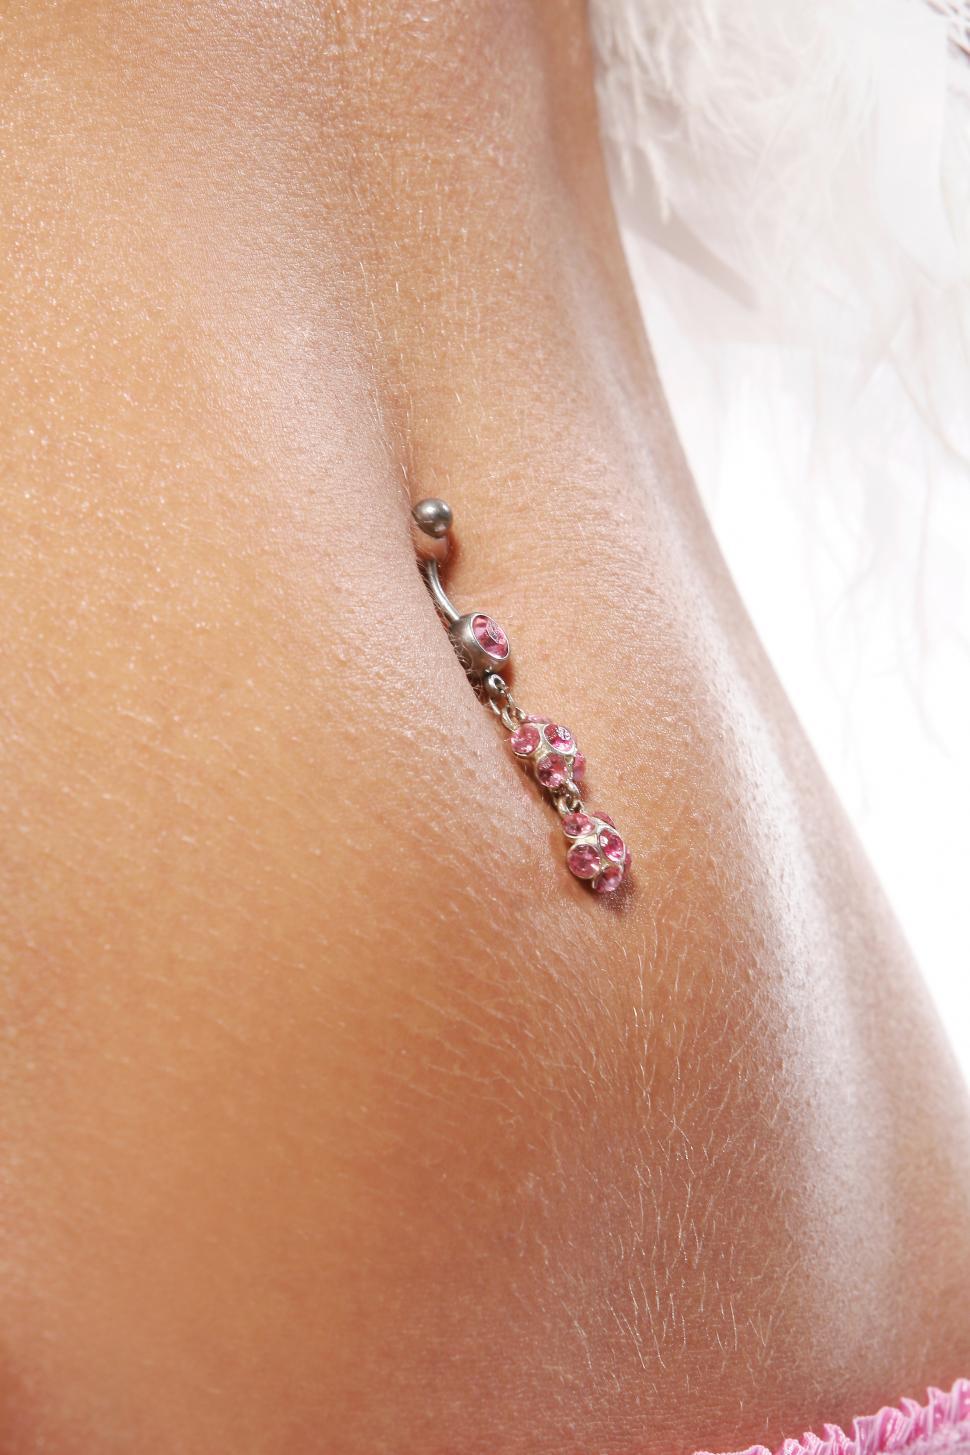 Free Image of Belly button jewelry  